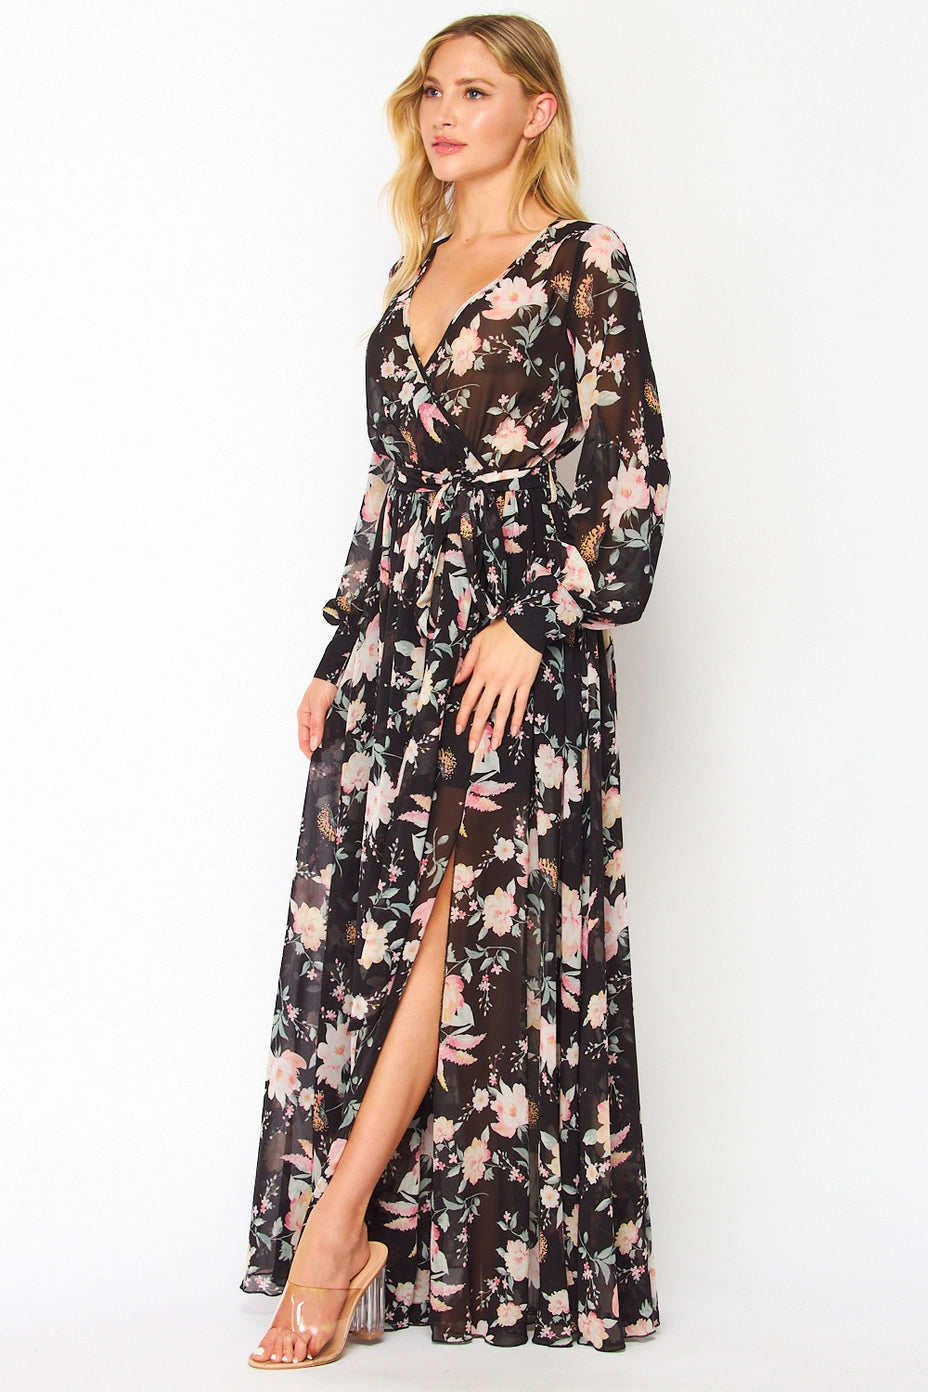 BLACK FLORAL MAXI DRESS – The Spruced Goose Boutique & Gifts